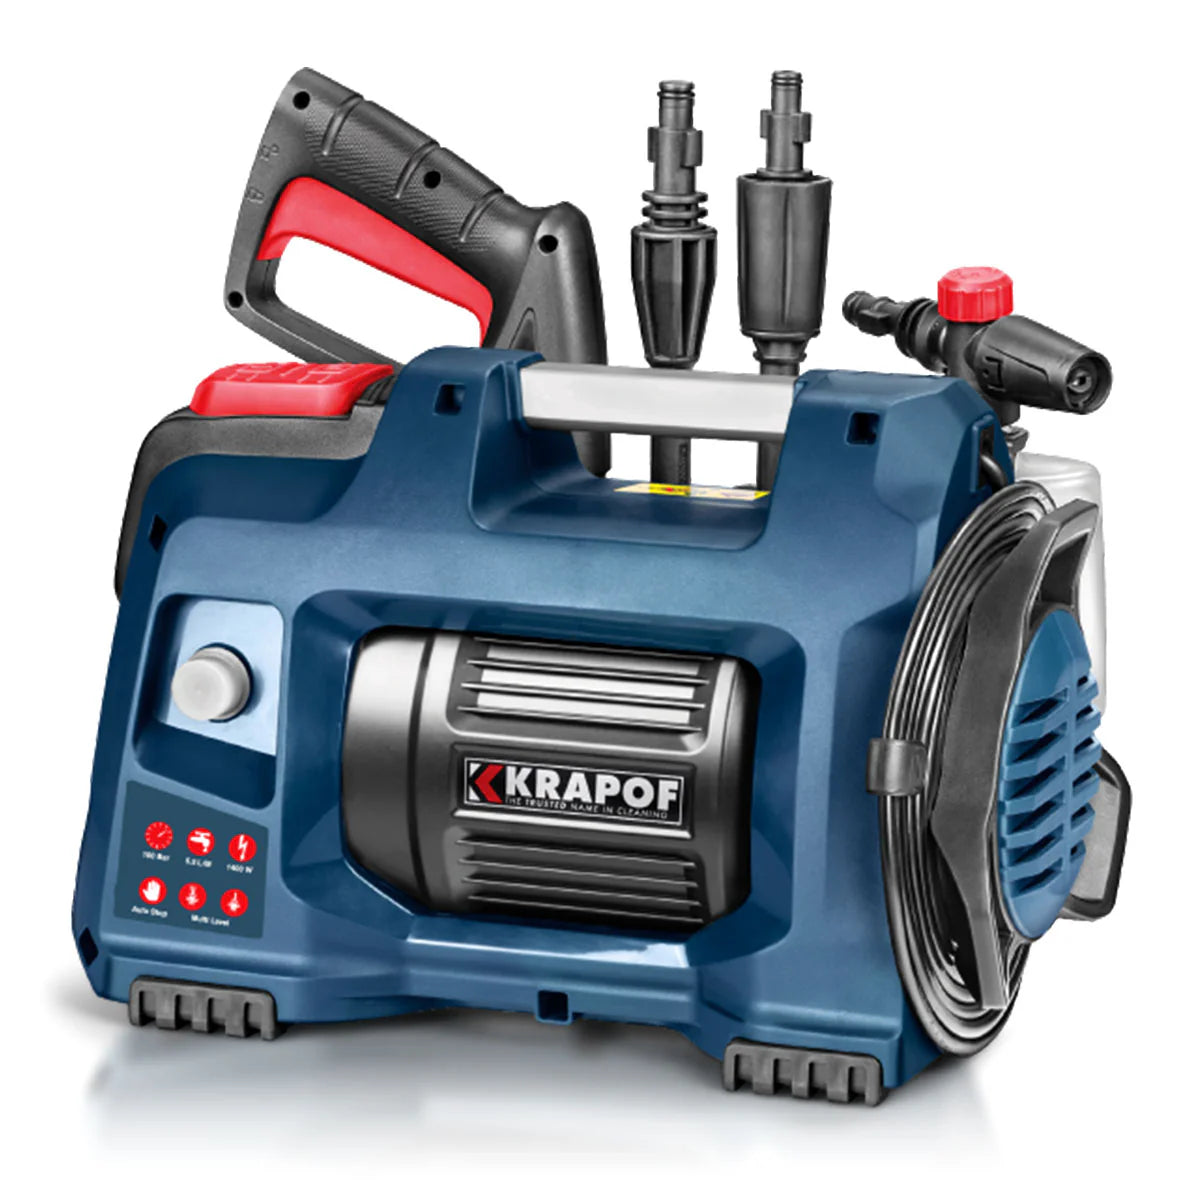 Image of KRAPOF Compact Electric Pressure Washer + BONUS Gifts + Cleaning E-Book